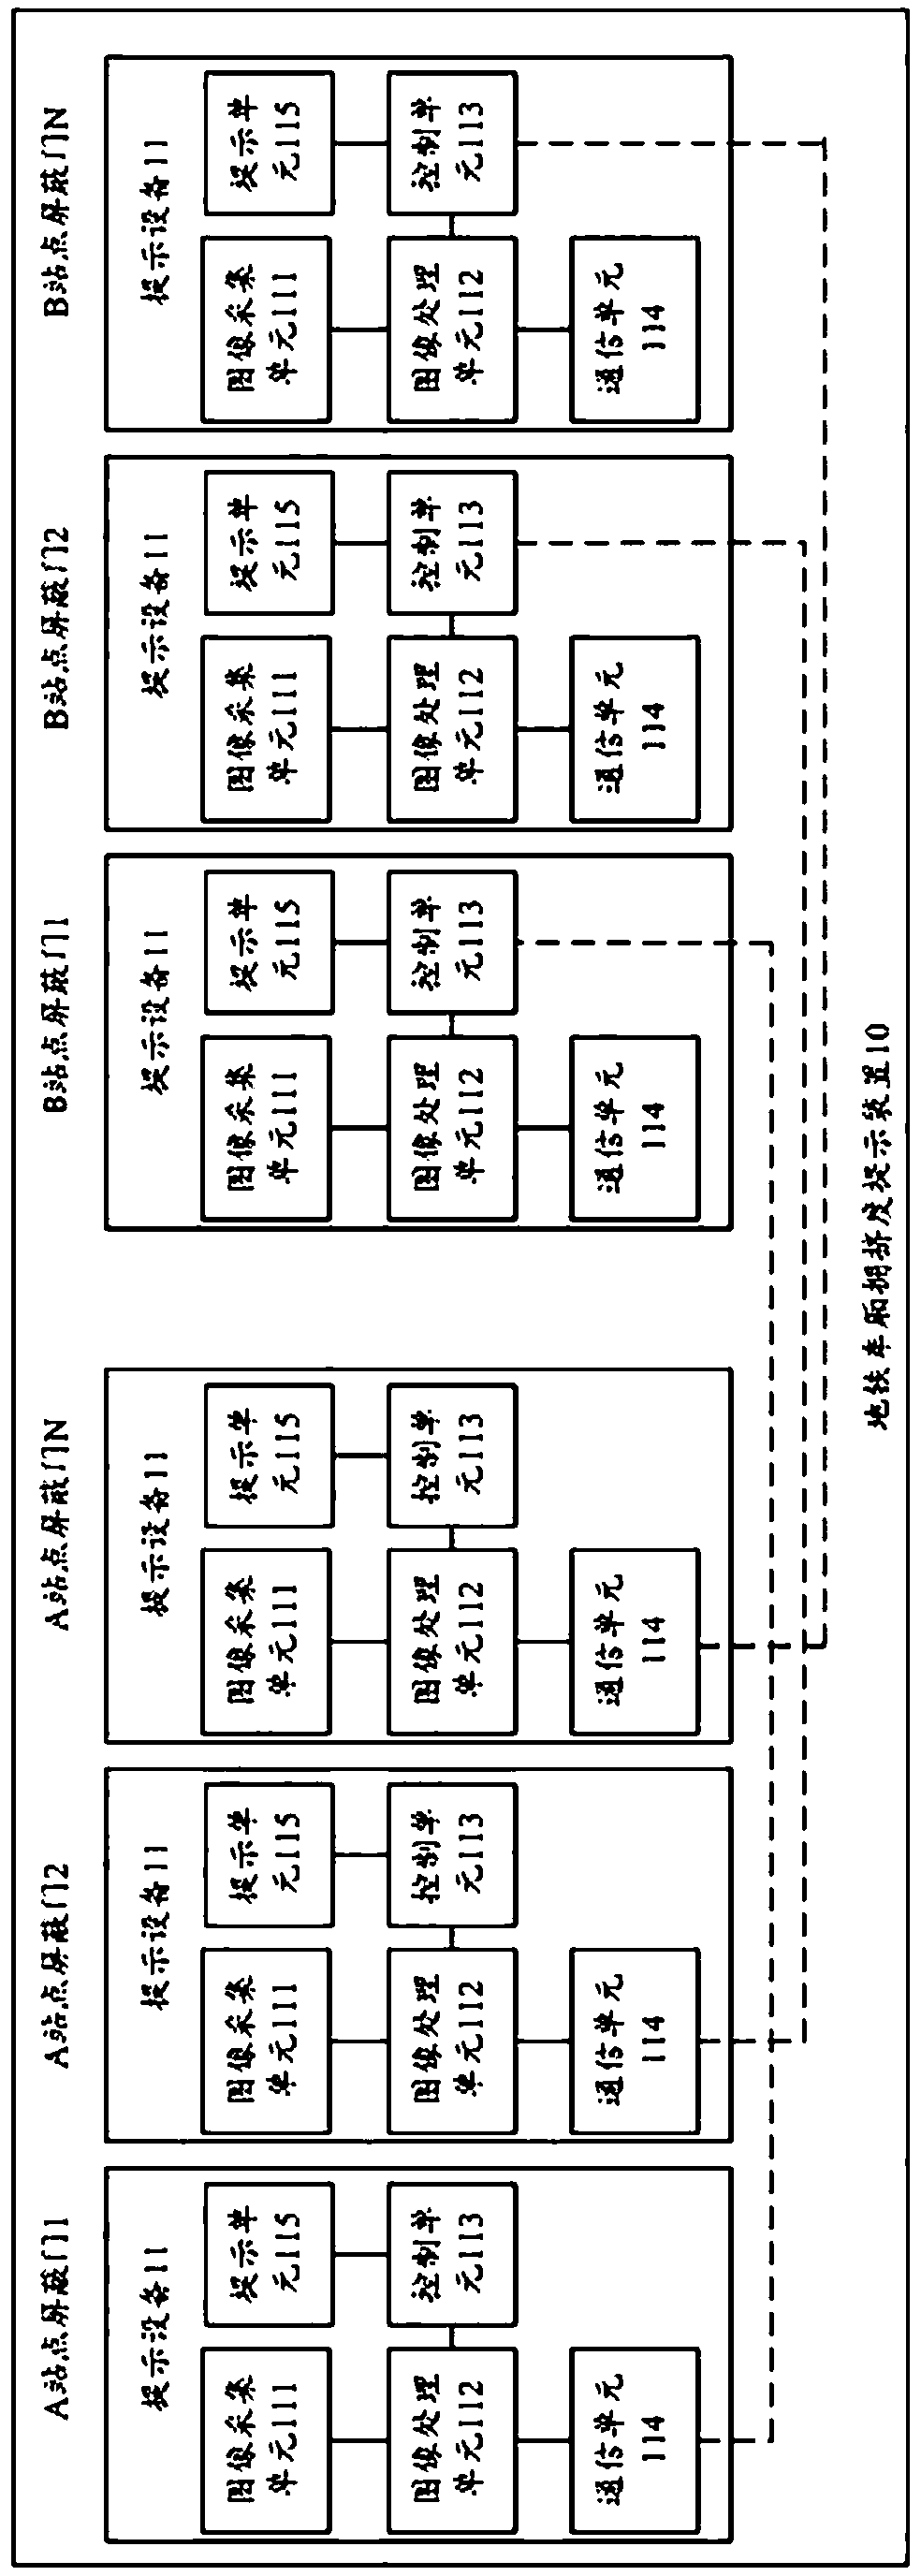 Subway carriage crowding degree prompting device and subway carriage crowding degree prompting method